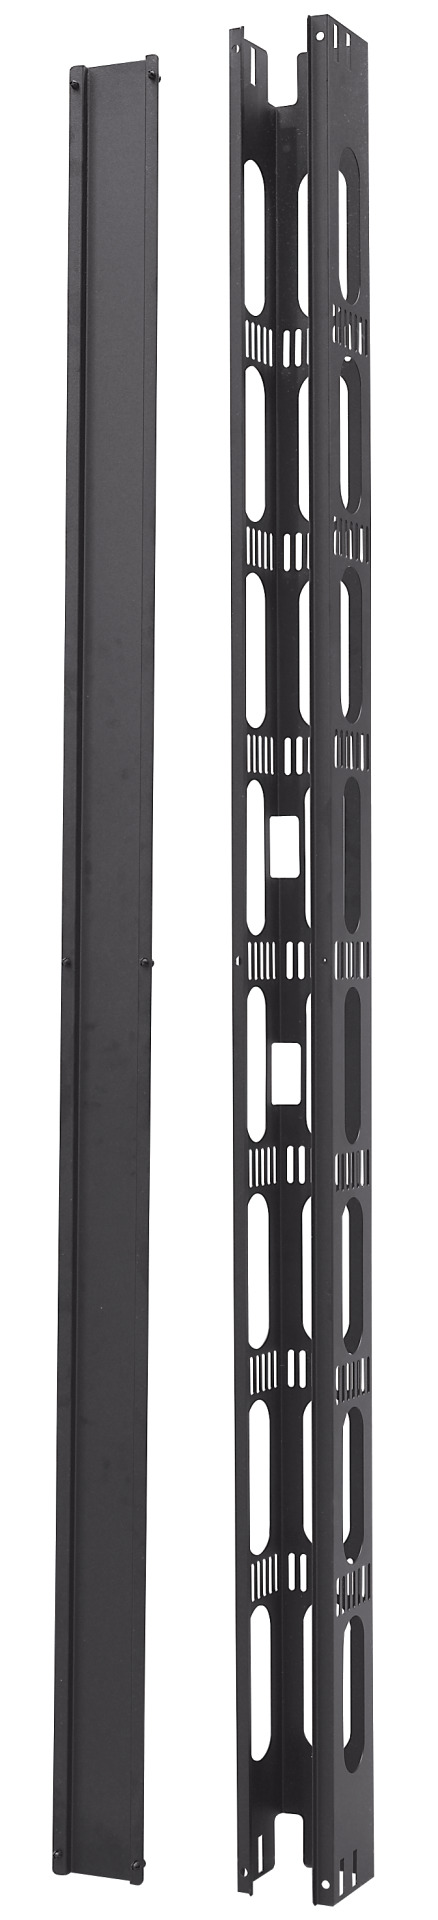 Vertical Cable Management 47U, 1 Piece, RAL7035, for PRO